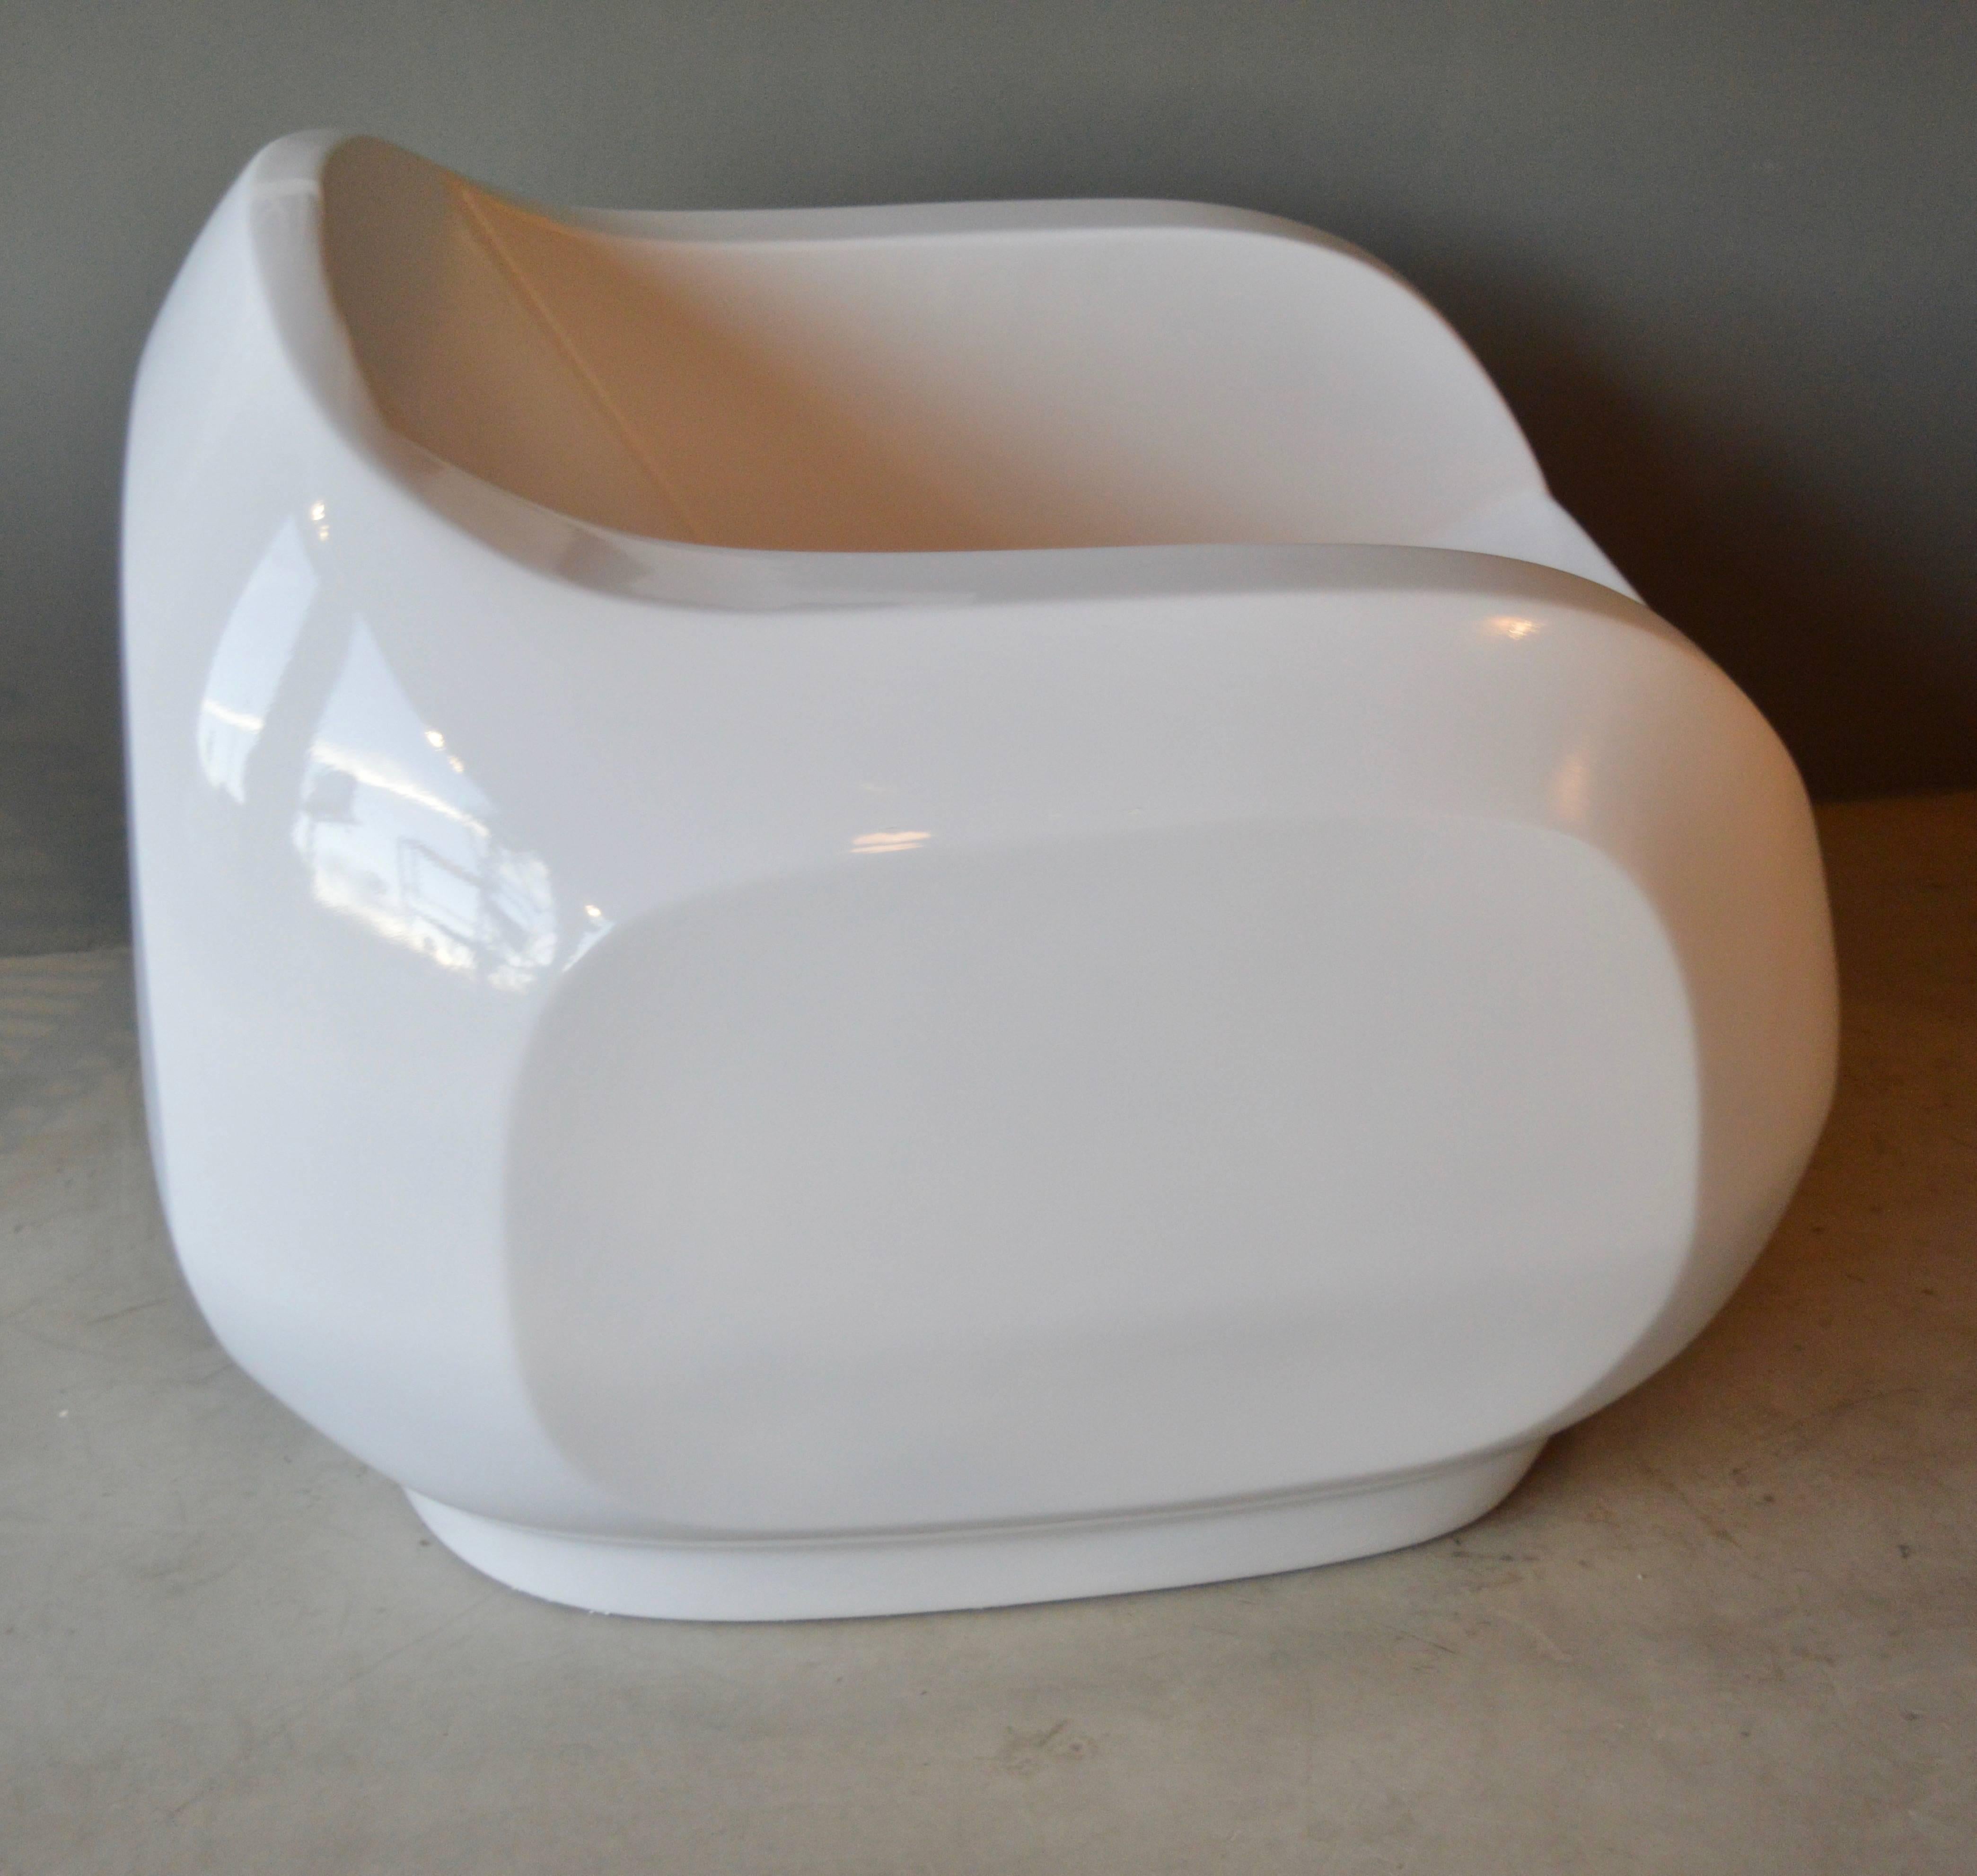 Rare Sculptural Fiberglass Chair In Excellent Condition For Sale In Los Angeles, CA